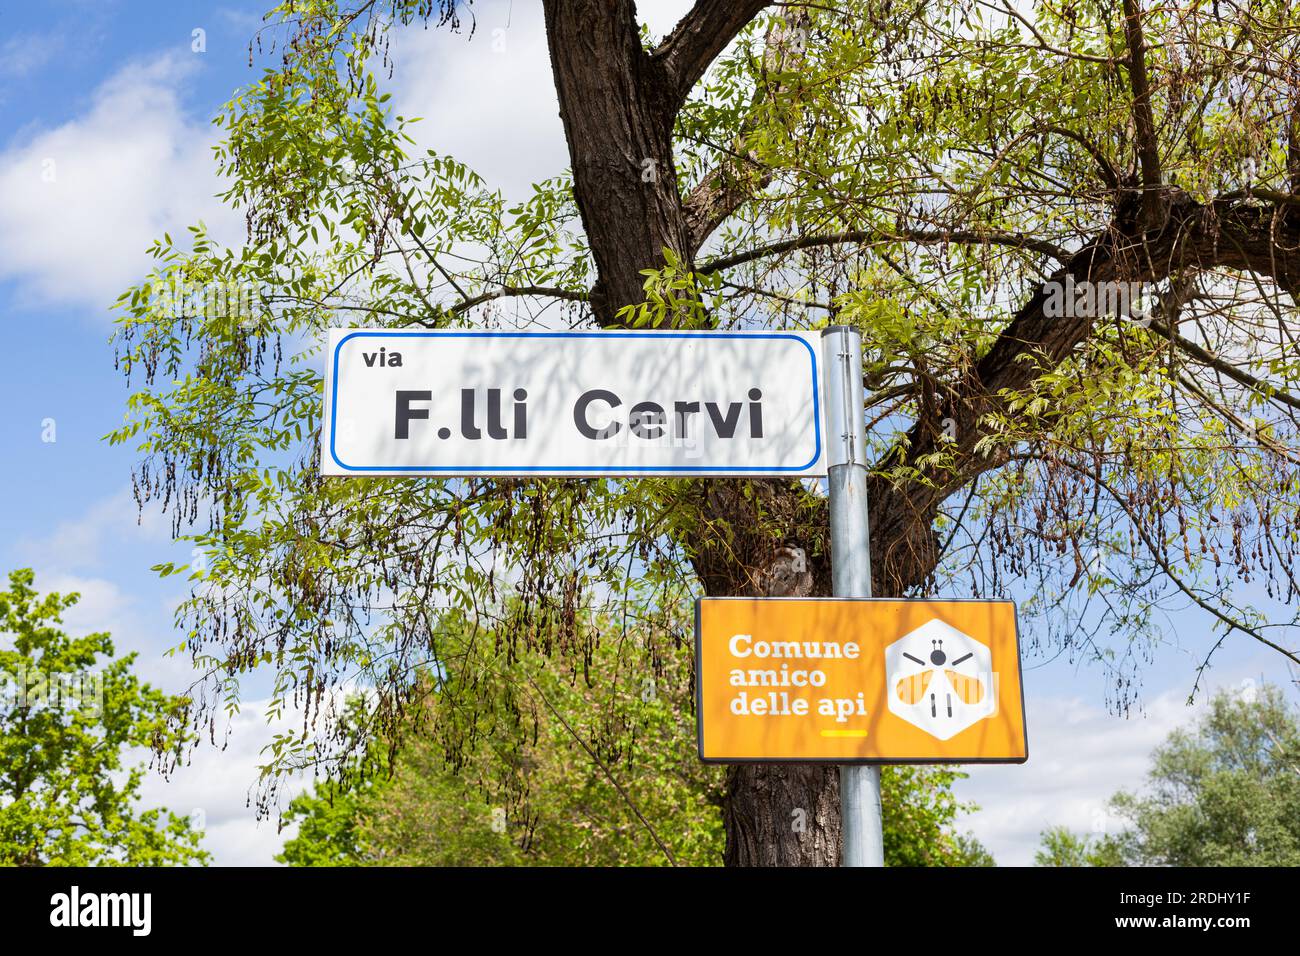 Gattatico, Reggio Emilia, Italy - April 25, 2023: Close-up of Italian street signs dedicated to the Cervi Brothers executed by a firing squad. Symbol Stock Photo